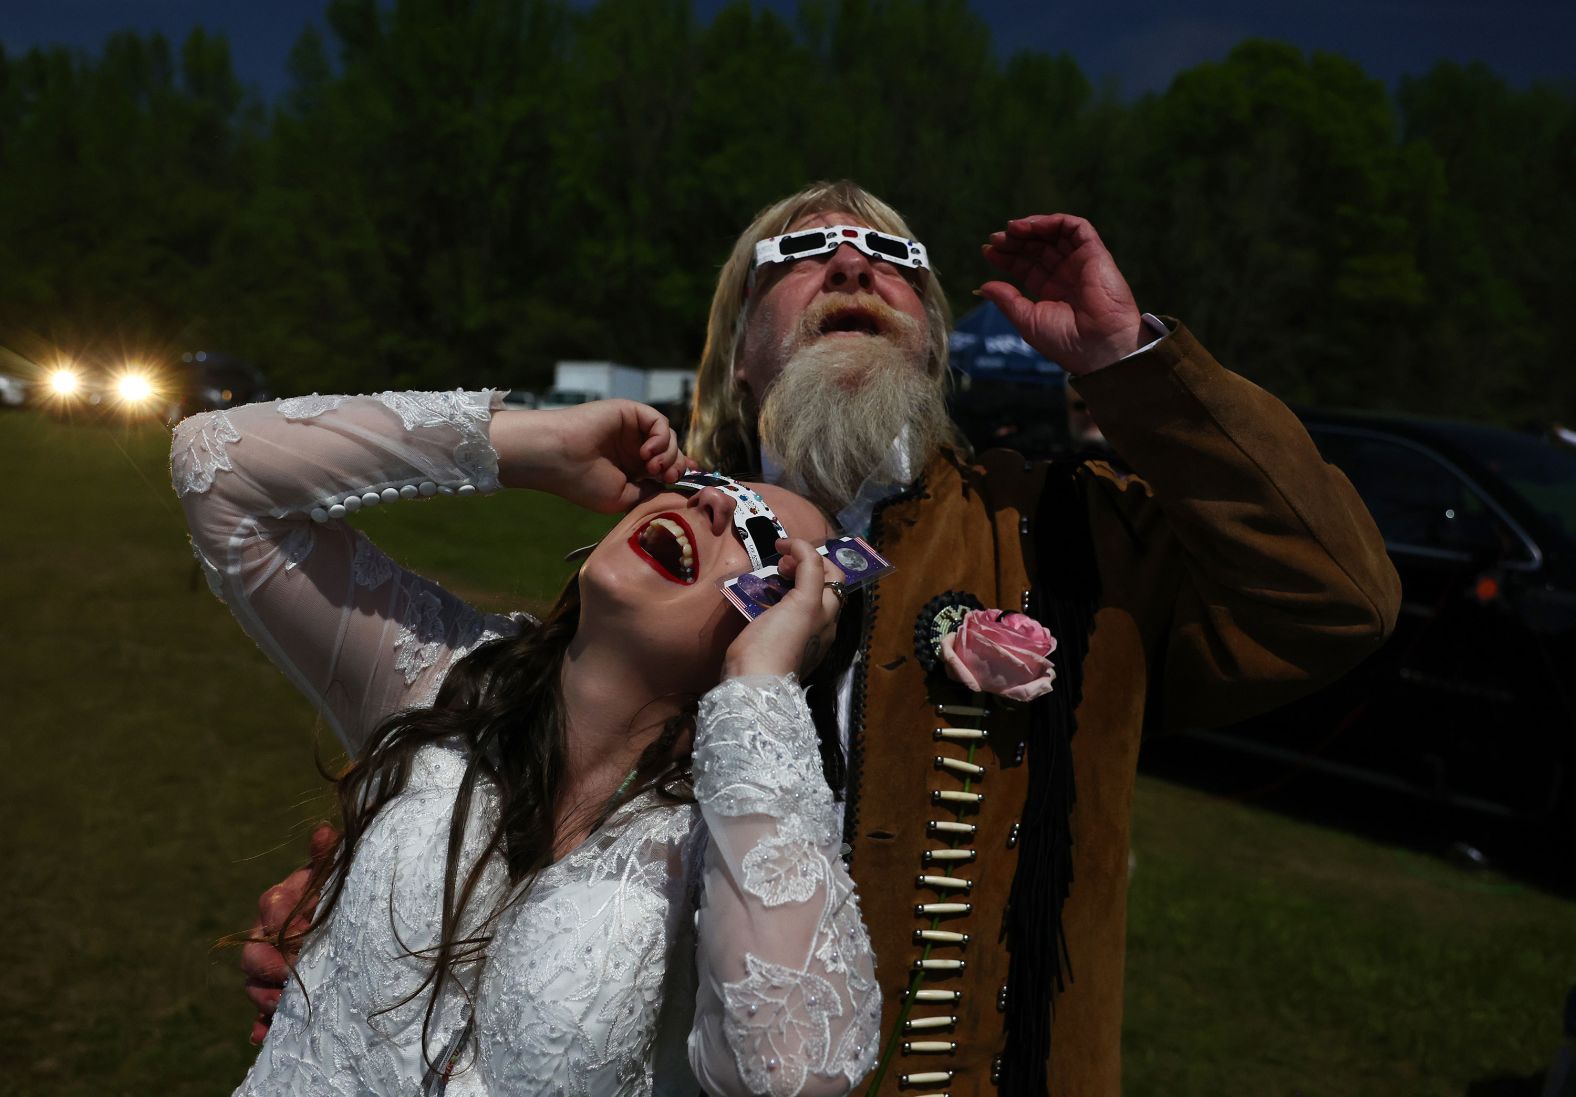 A newly married couple views the eclipse after a <a href="index.php?page=&url=https%3A%2F%2Fwww.cnn.com%2Fworld%2Flive-news%2Ftotal-solar-eclipse-04-08-24-scn%2Fh_c5bf02a1f61852f076e1c082cd6f6290" target="_blank">mass wedding</a> in Russellville, Arkansas, on Monday, April 8. They were one of 358 couples who tied the knot at an "Elope at the Eclipse" event.